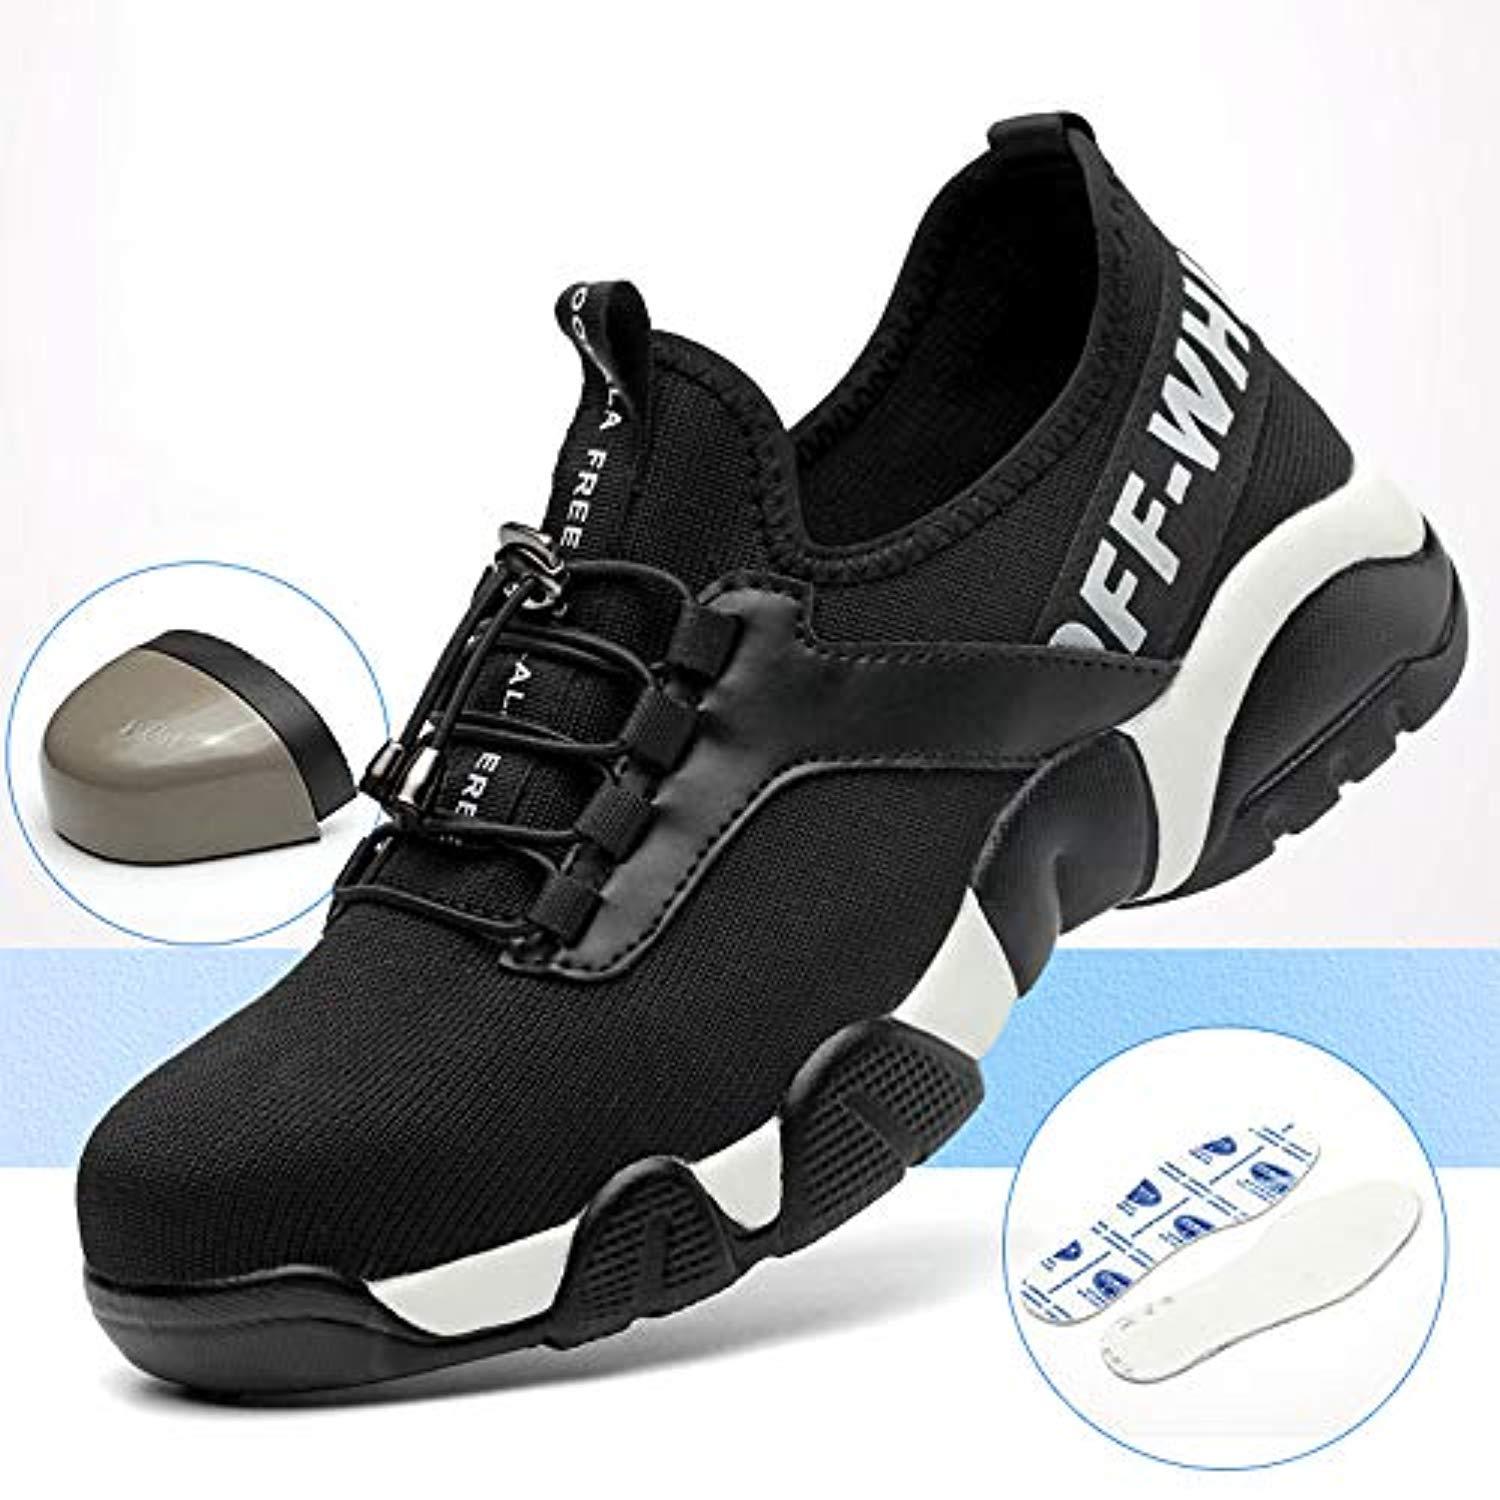 getch steel toe shoes